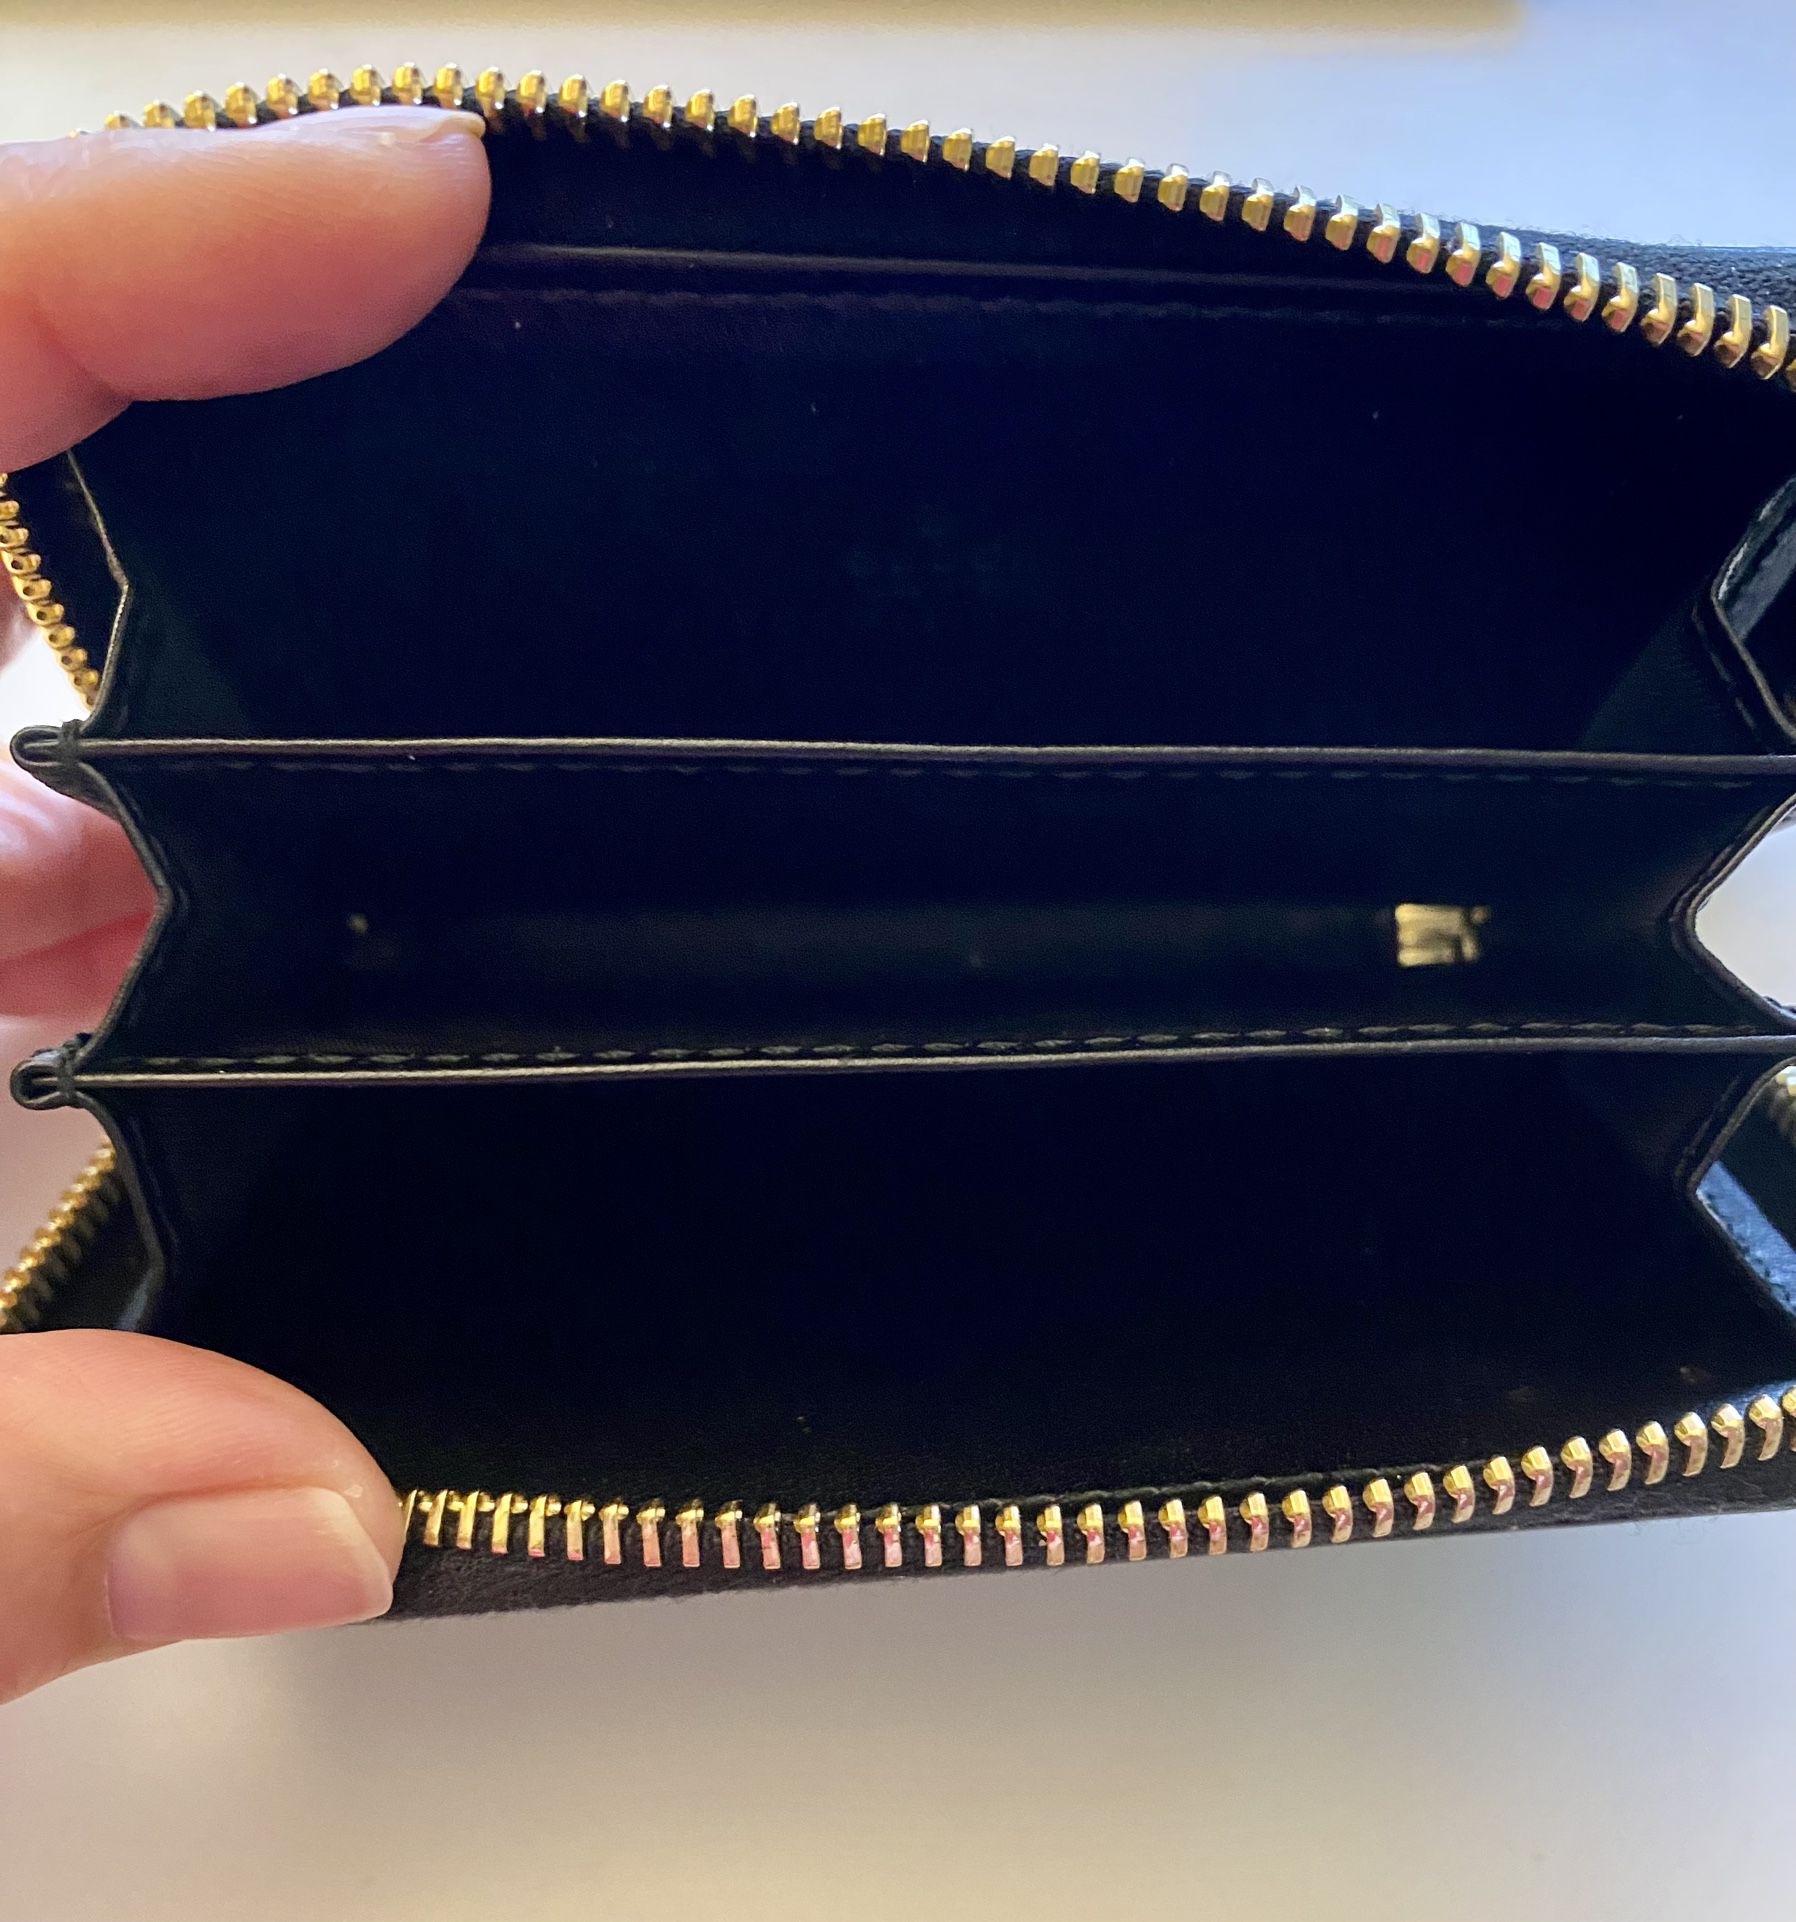 Gucci Wallet All Black – lex luxe supply